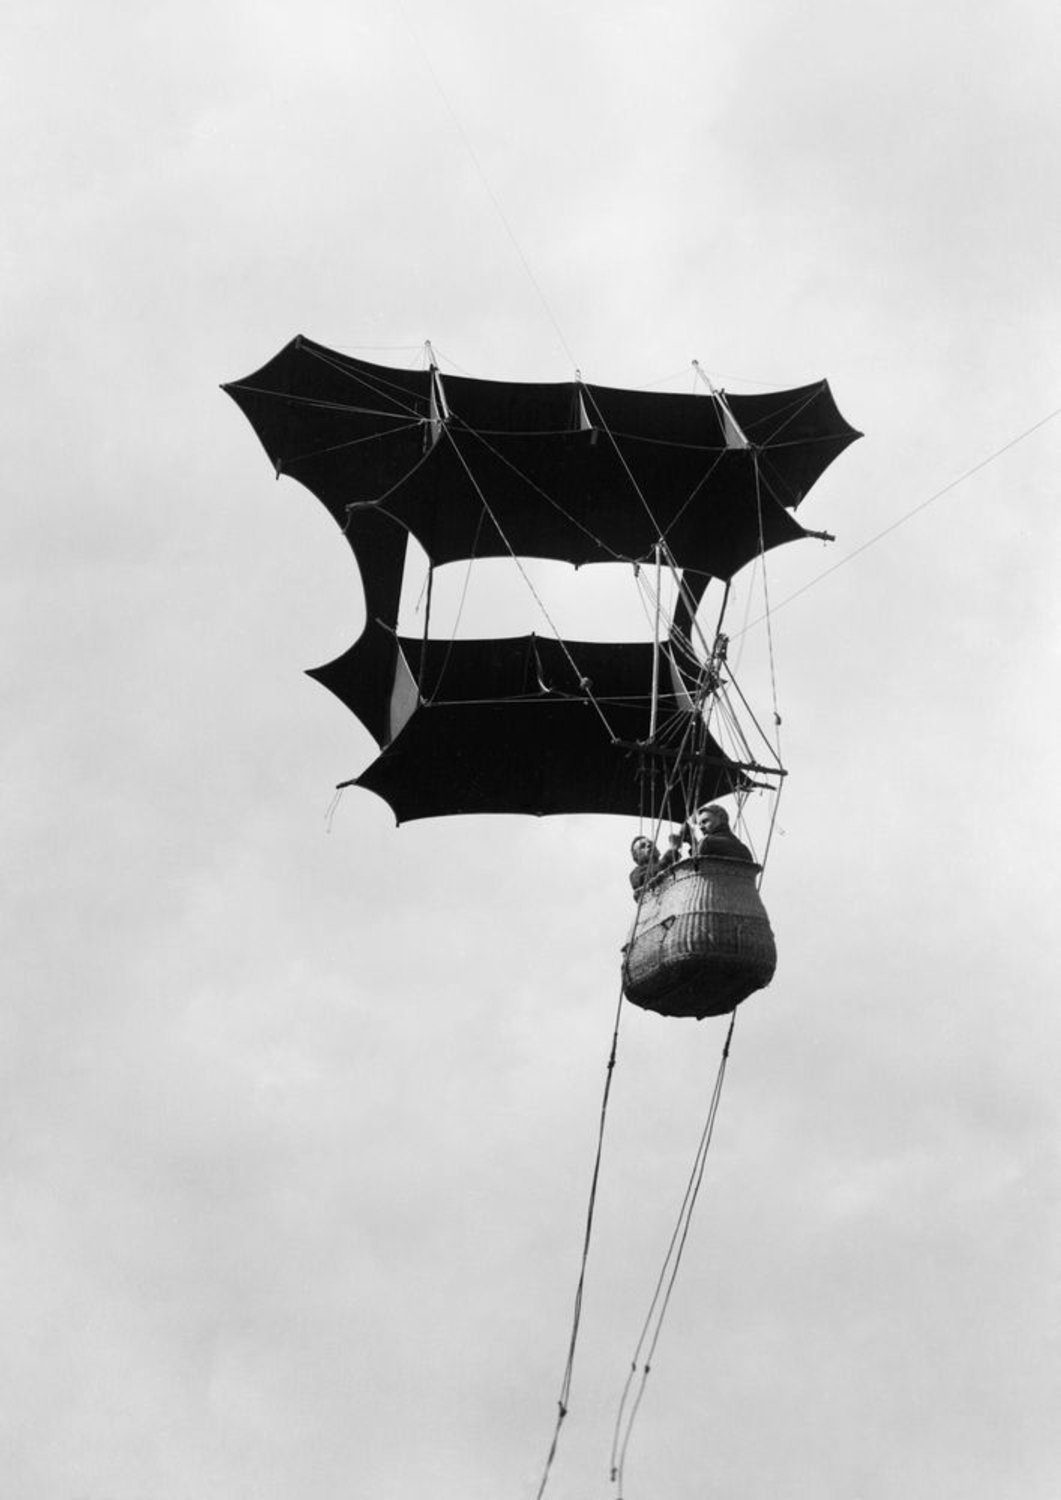 A pre-First World War demonstration of a two man kite designed by Samuel Franklin Cody for use by the British Army's Royal Engineers Balloon Section, pre-1914, auteur: Royal Engineers official photographer, This work created by the United Kingdom Government is in the public domain.